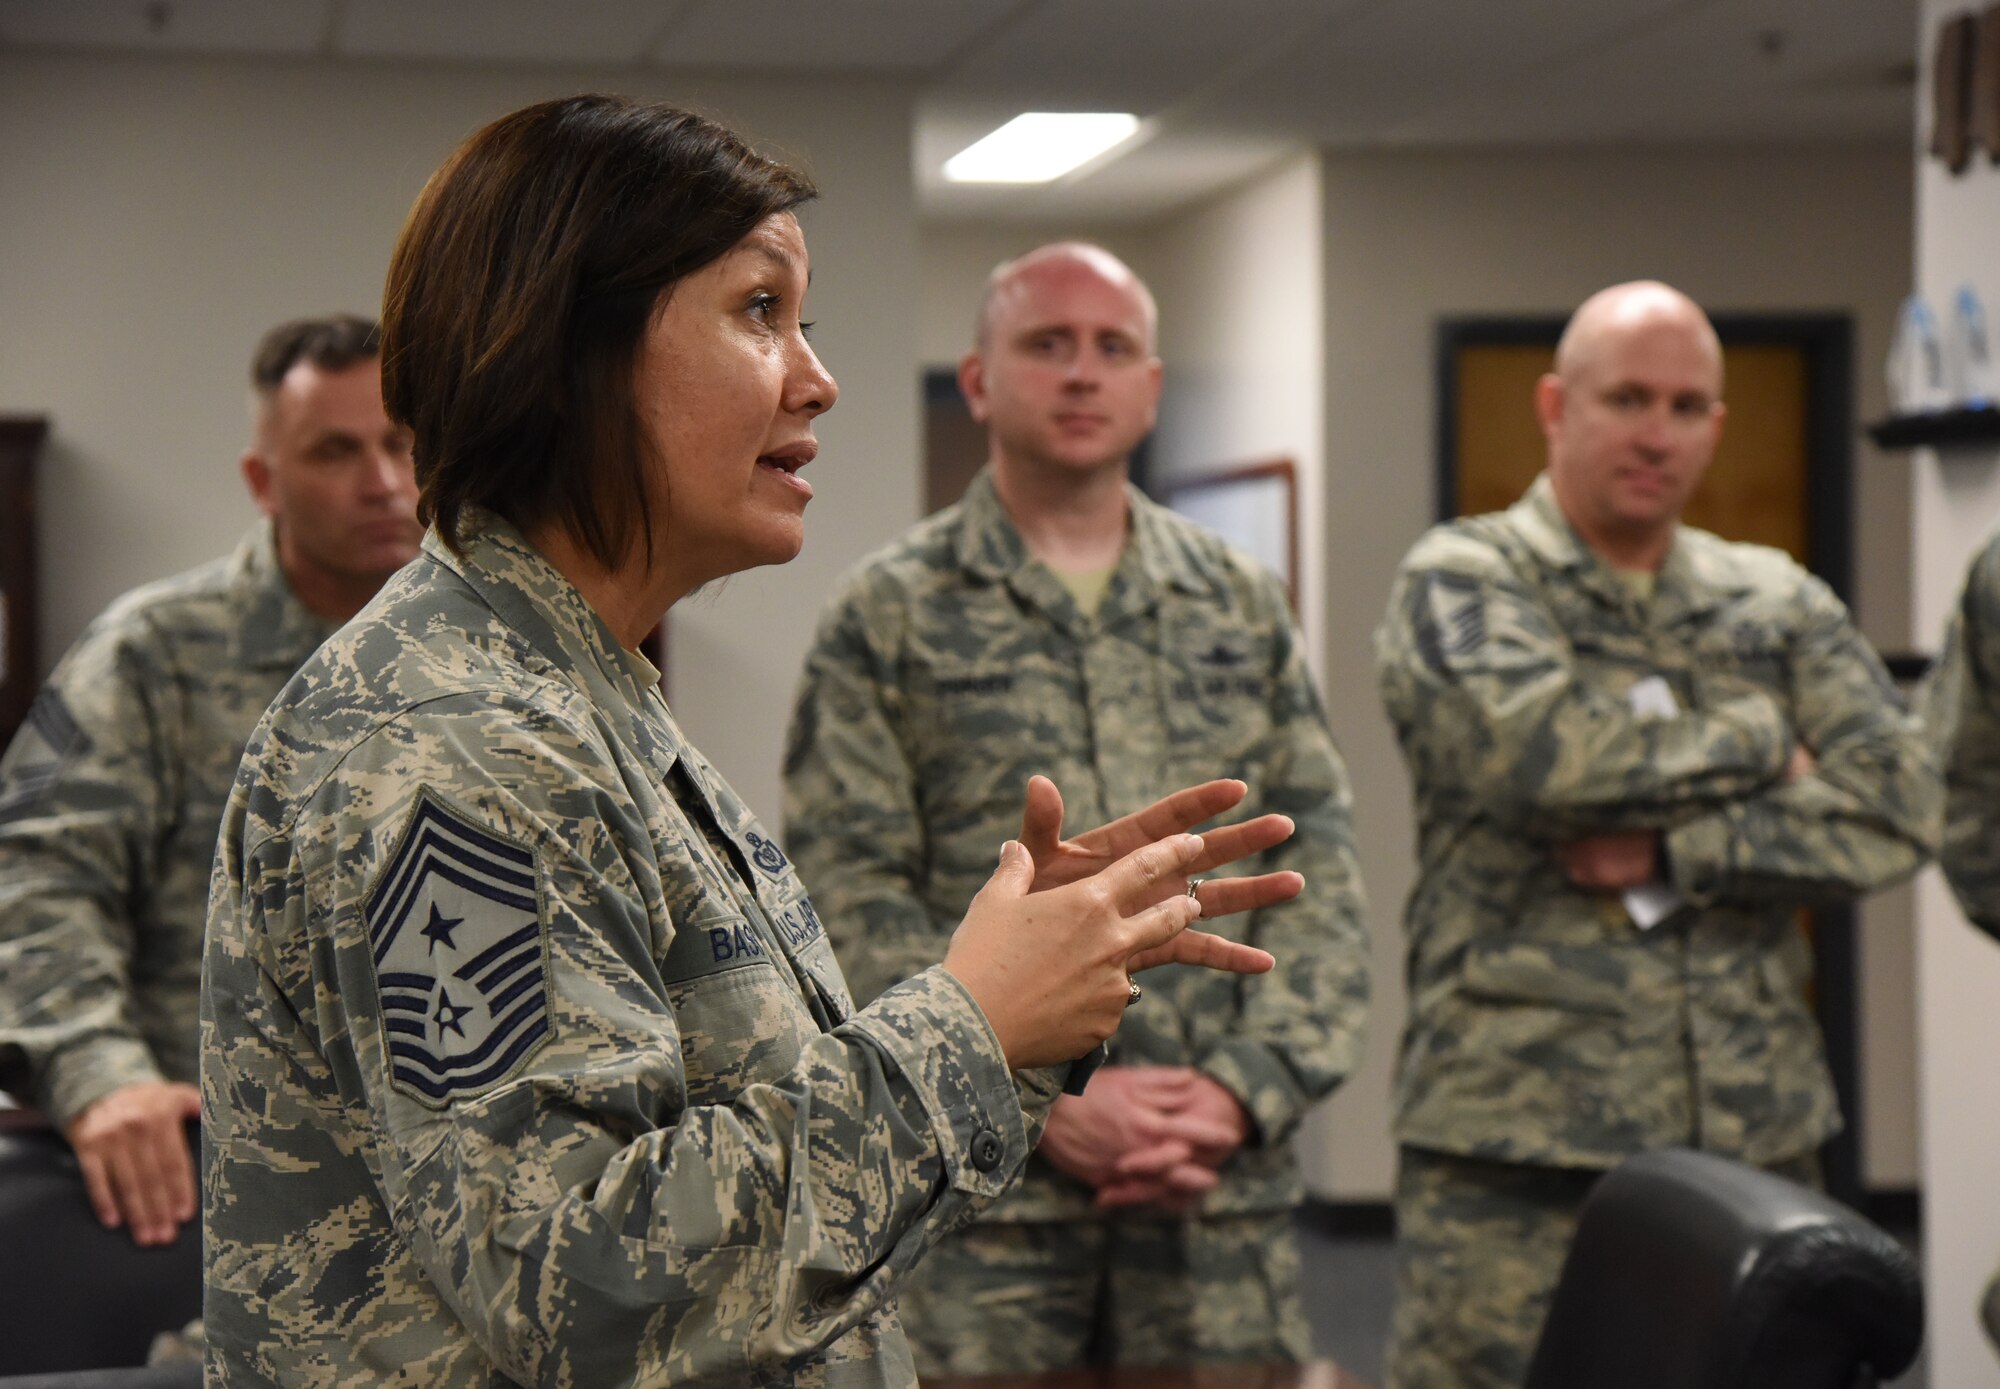 Chief Master Sgt. JoAnne Bass, 2nd Air Force command chief, speaks to 81st Training Group personnel during an immersion tour at the Levitow Training Support Facility on Keesler Air Force Base, Mississippi, Aug. 23, 2018. The purpose of the tour was to become more familiar with Keesler's mission. (U.S. Air Force photo by Kemberly Groue)